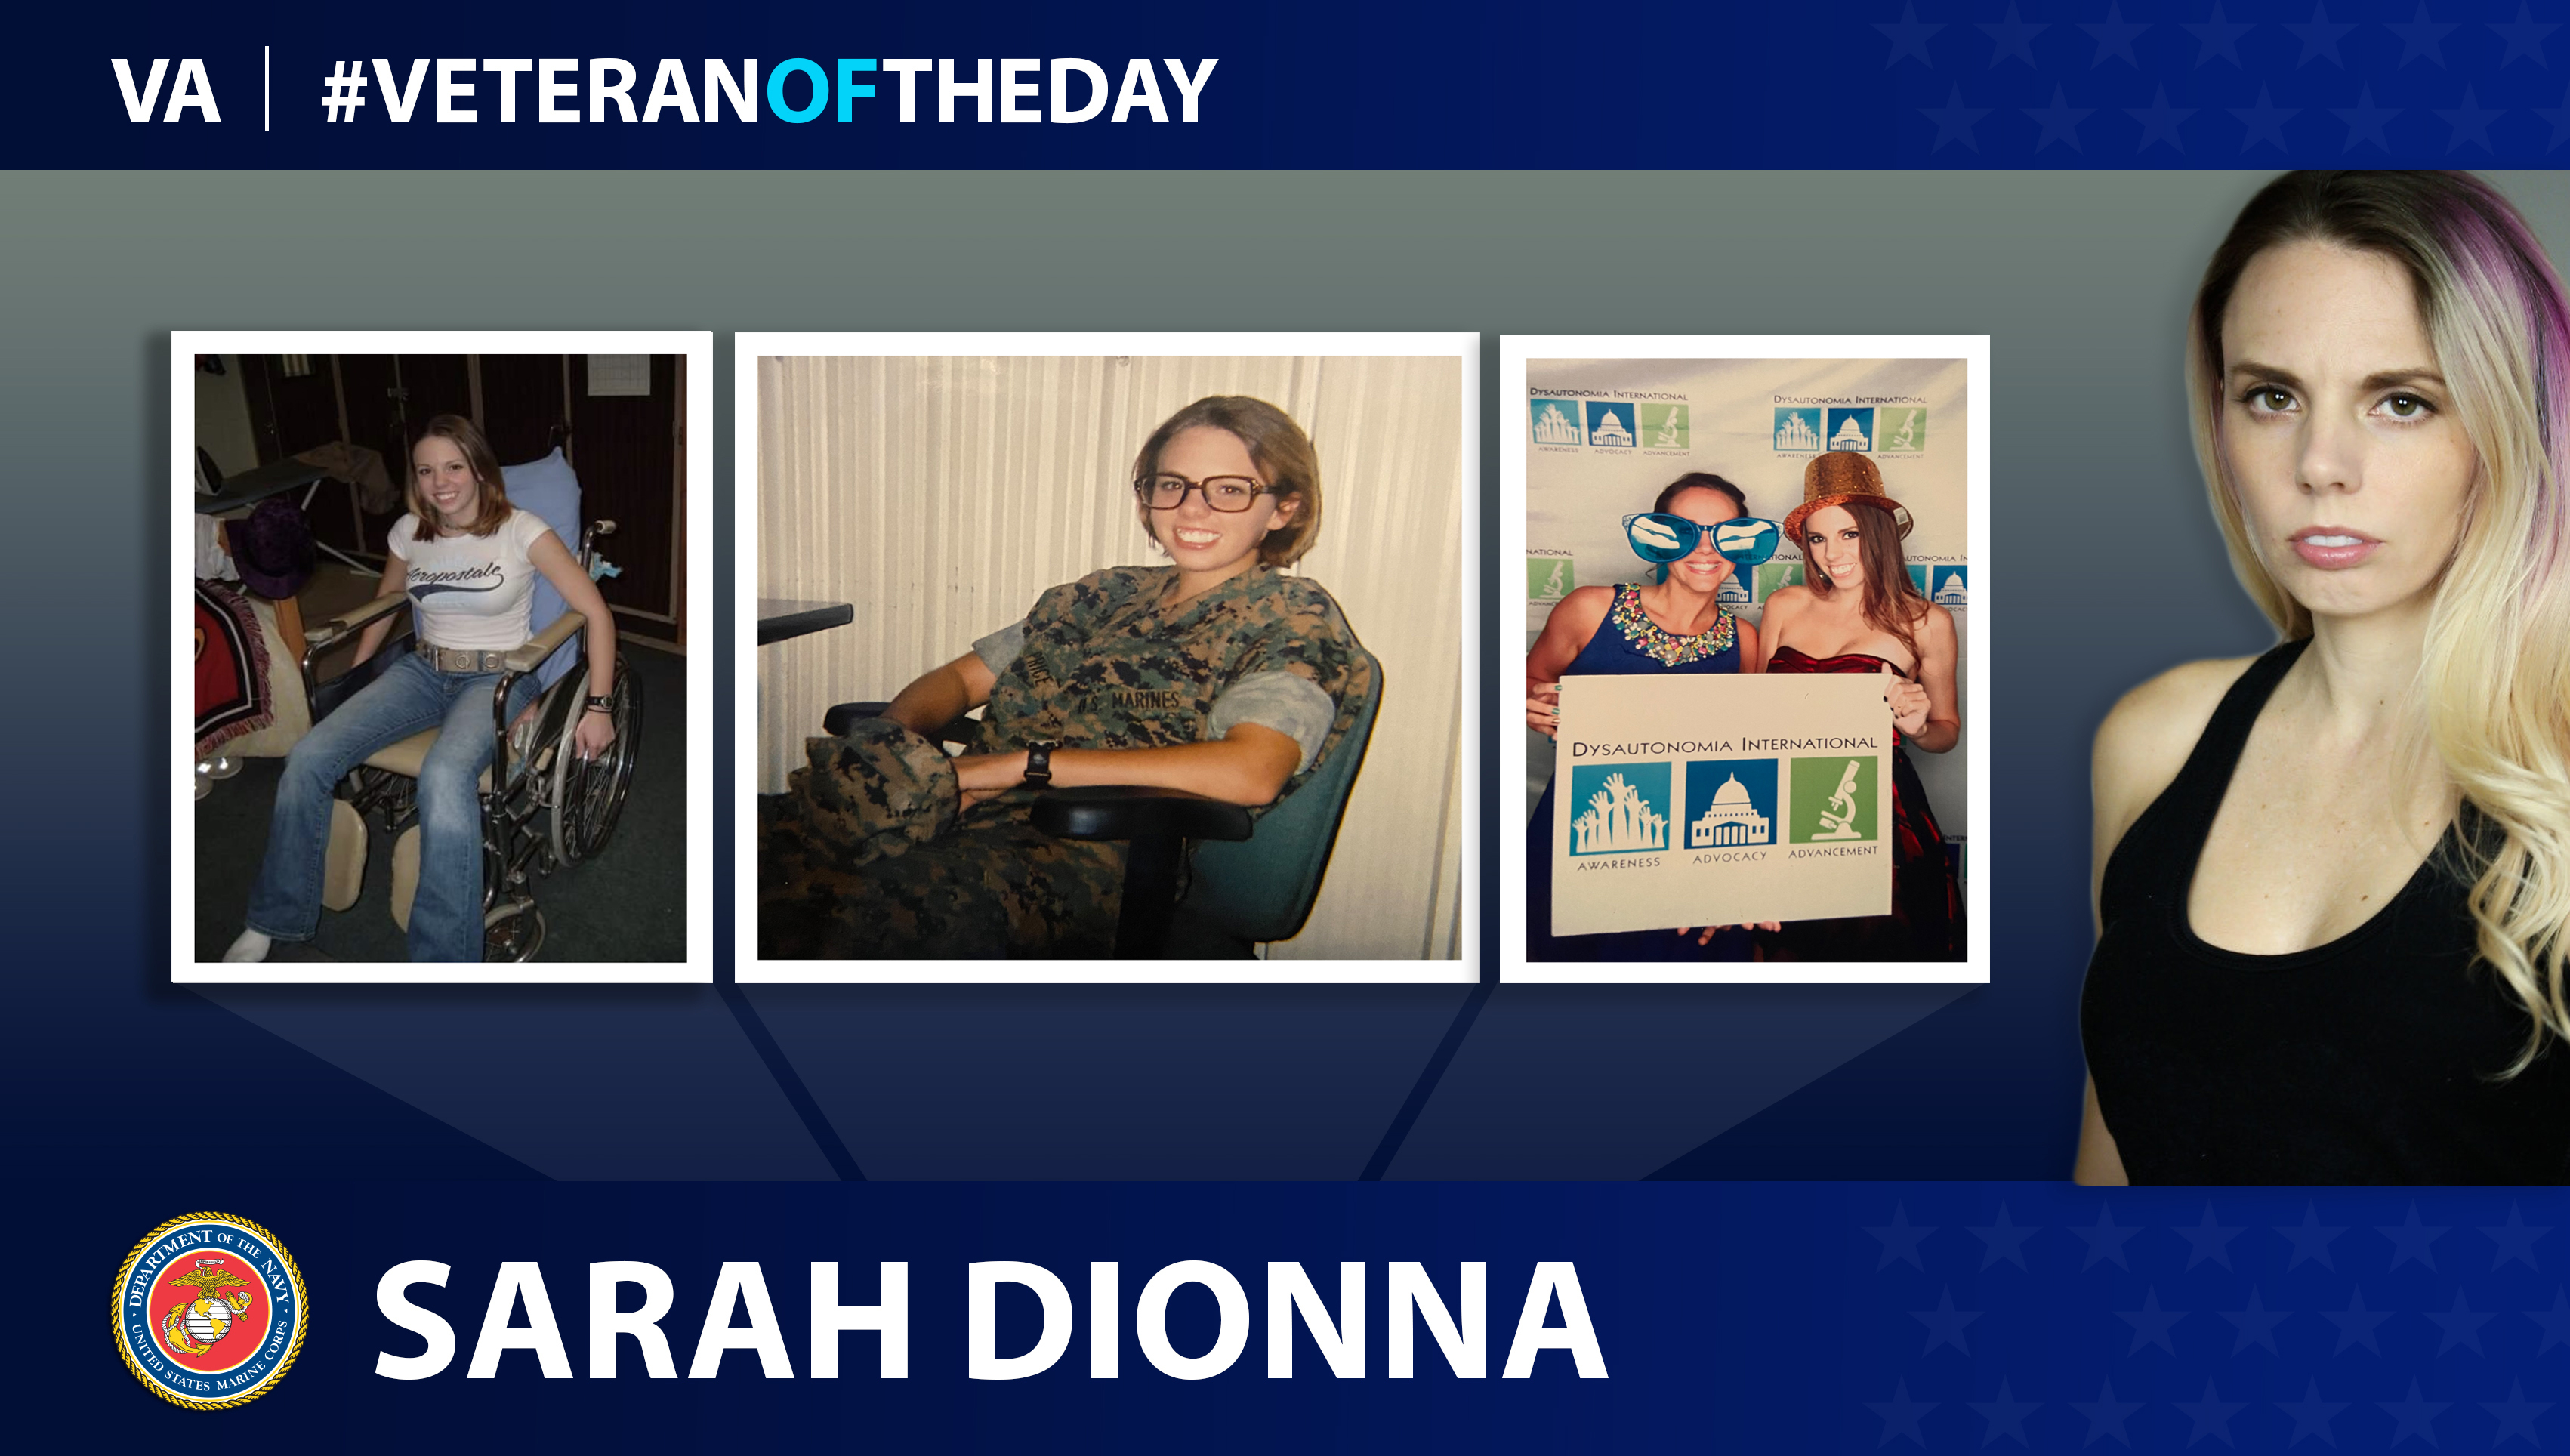 Marine Corps Veteran Sarah Dionna is today's Veteran of the day.